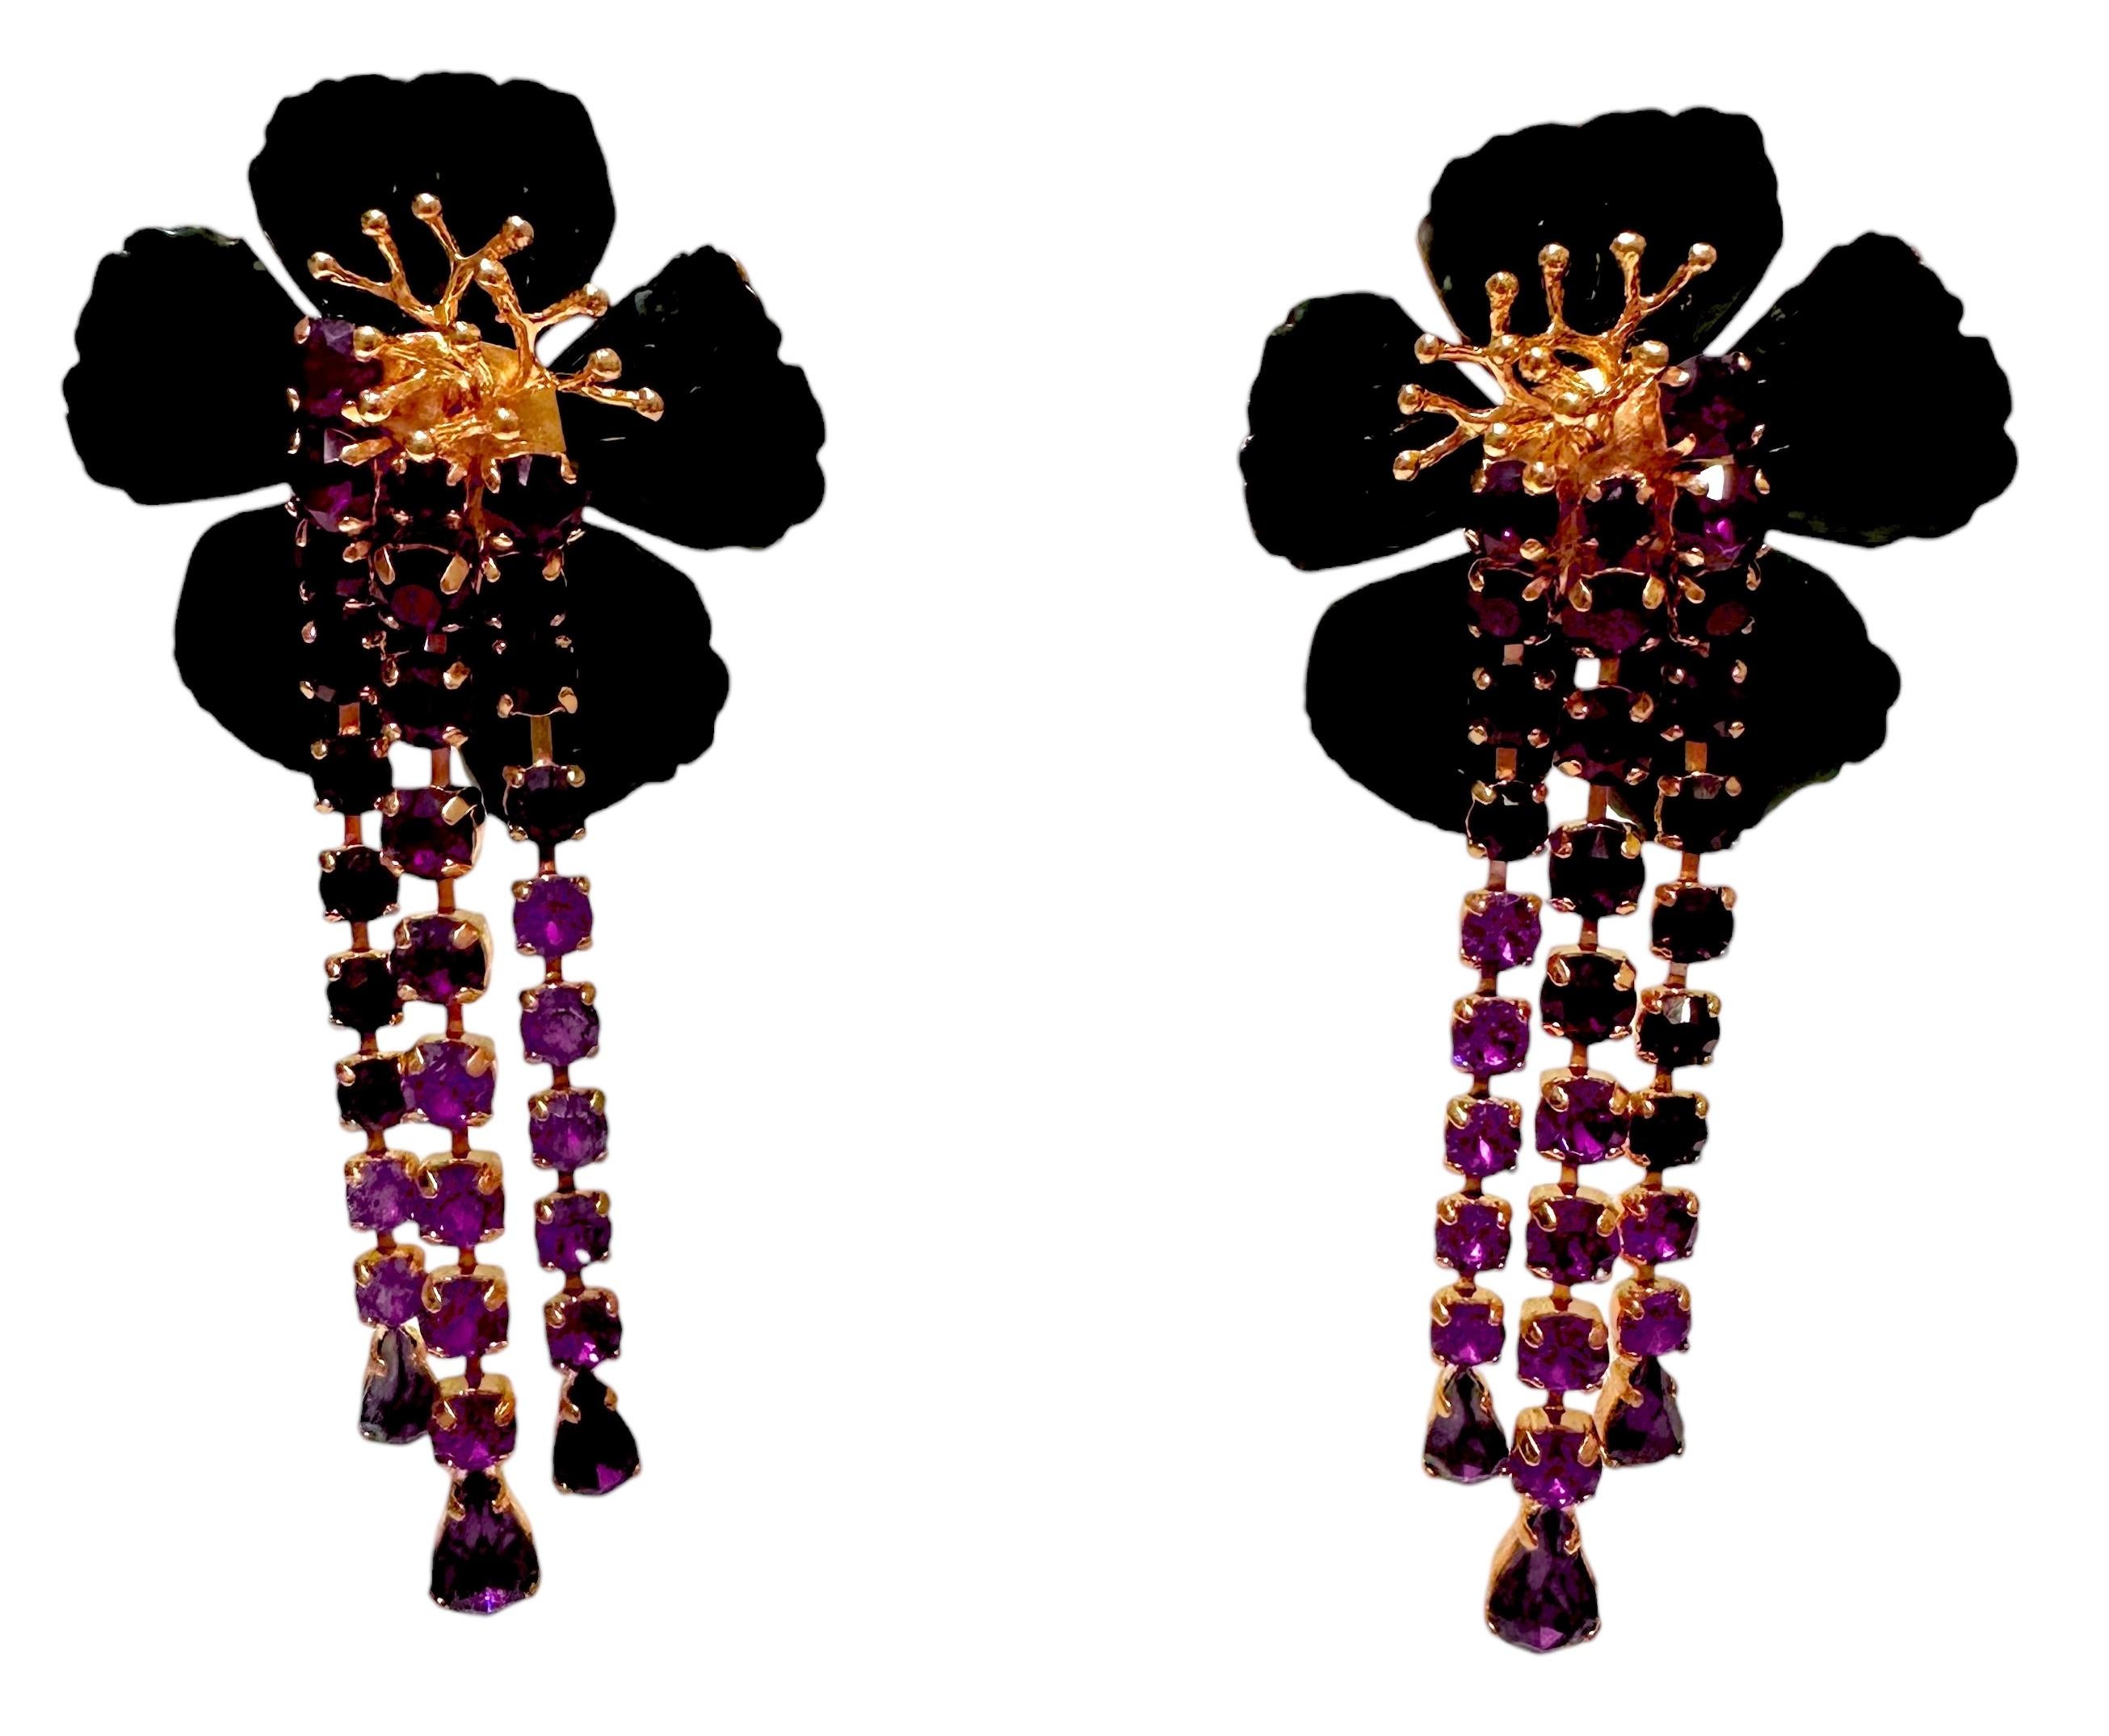 Sevilla collection
All the mystery of Spain are found in this collection with powerful colors. Intoxicating and sensual flowers like a swirling flamenco dress.
Enameled flowers, colored Swarovski crystals on metal gilded with fine gold. Clip